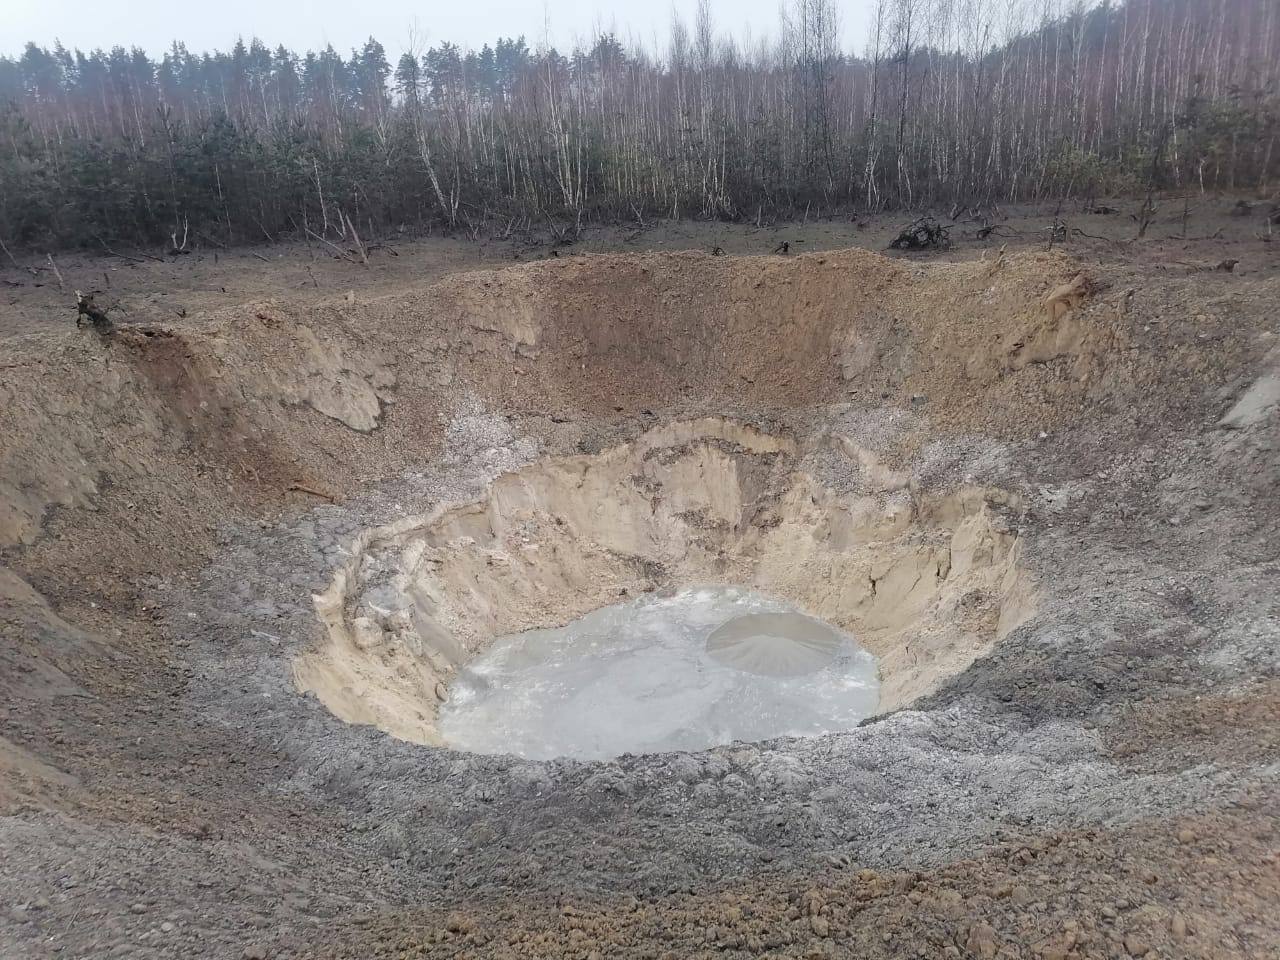 Crater created by a russian missile attack, believed to be the consequence of a KN-23 missile hit